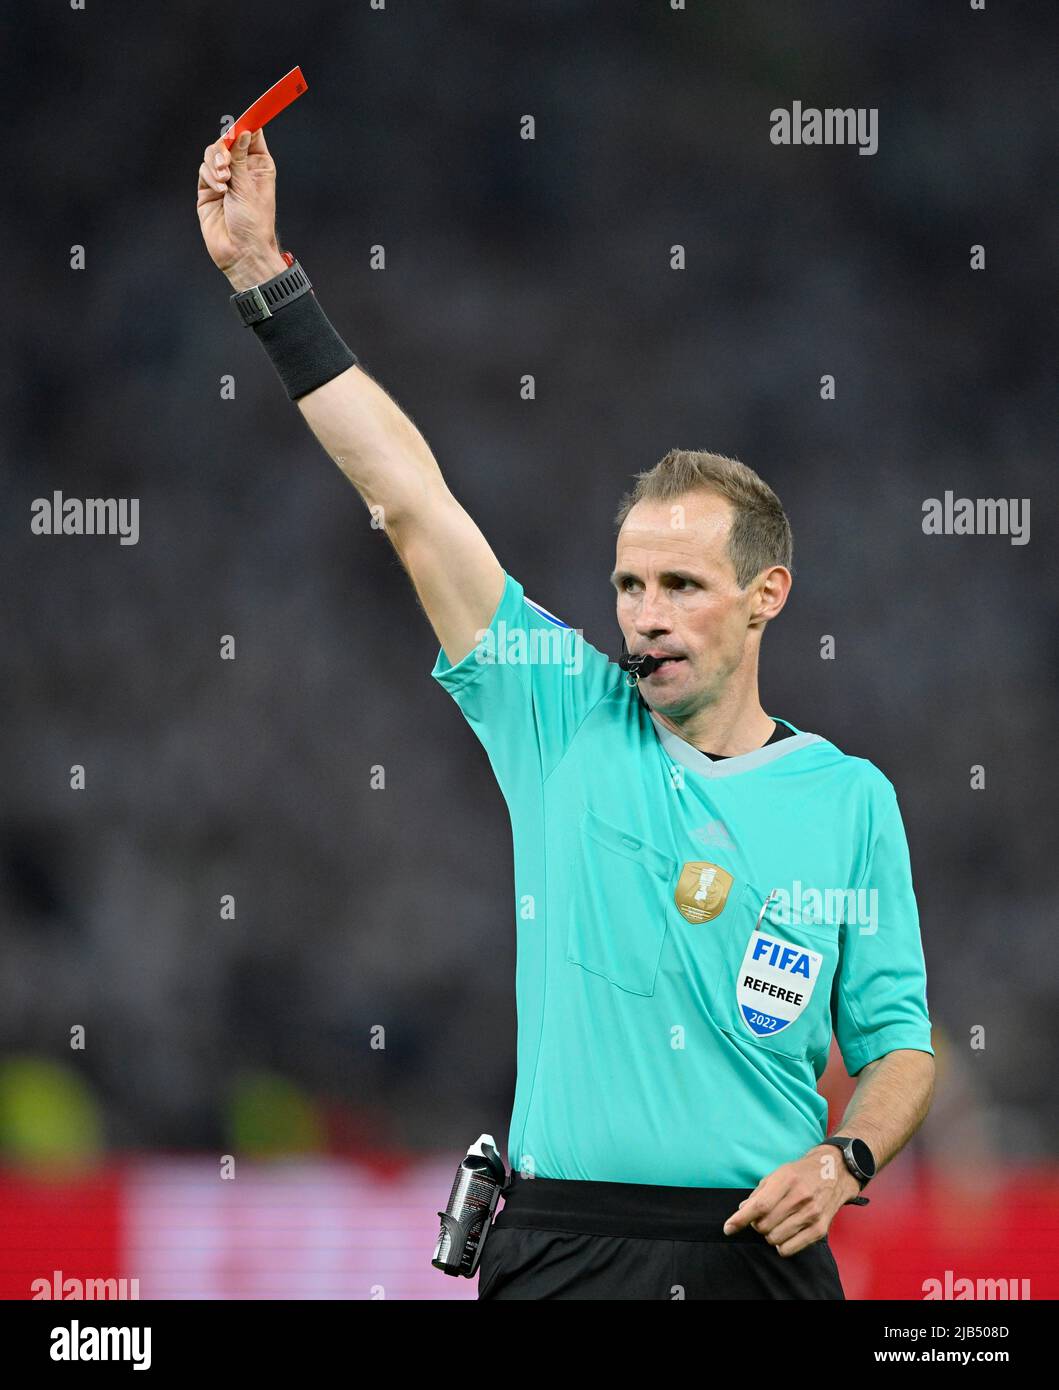 Referee Referee Sascha Stegemann gesture, gestures, shows red card, sending off, 79th DFB Cup Final, Olympiastadion, Berlin, Germany Stock Photo